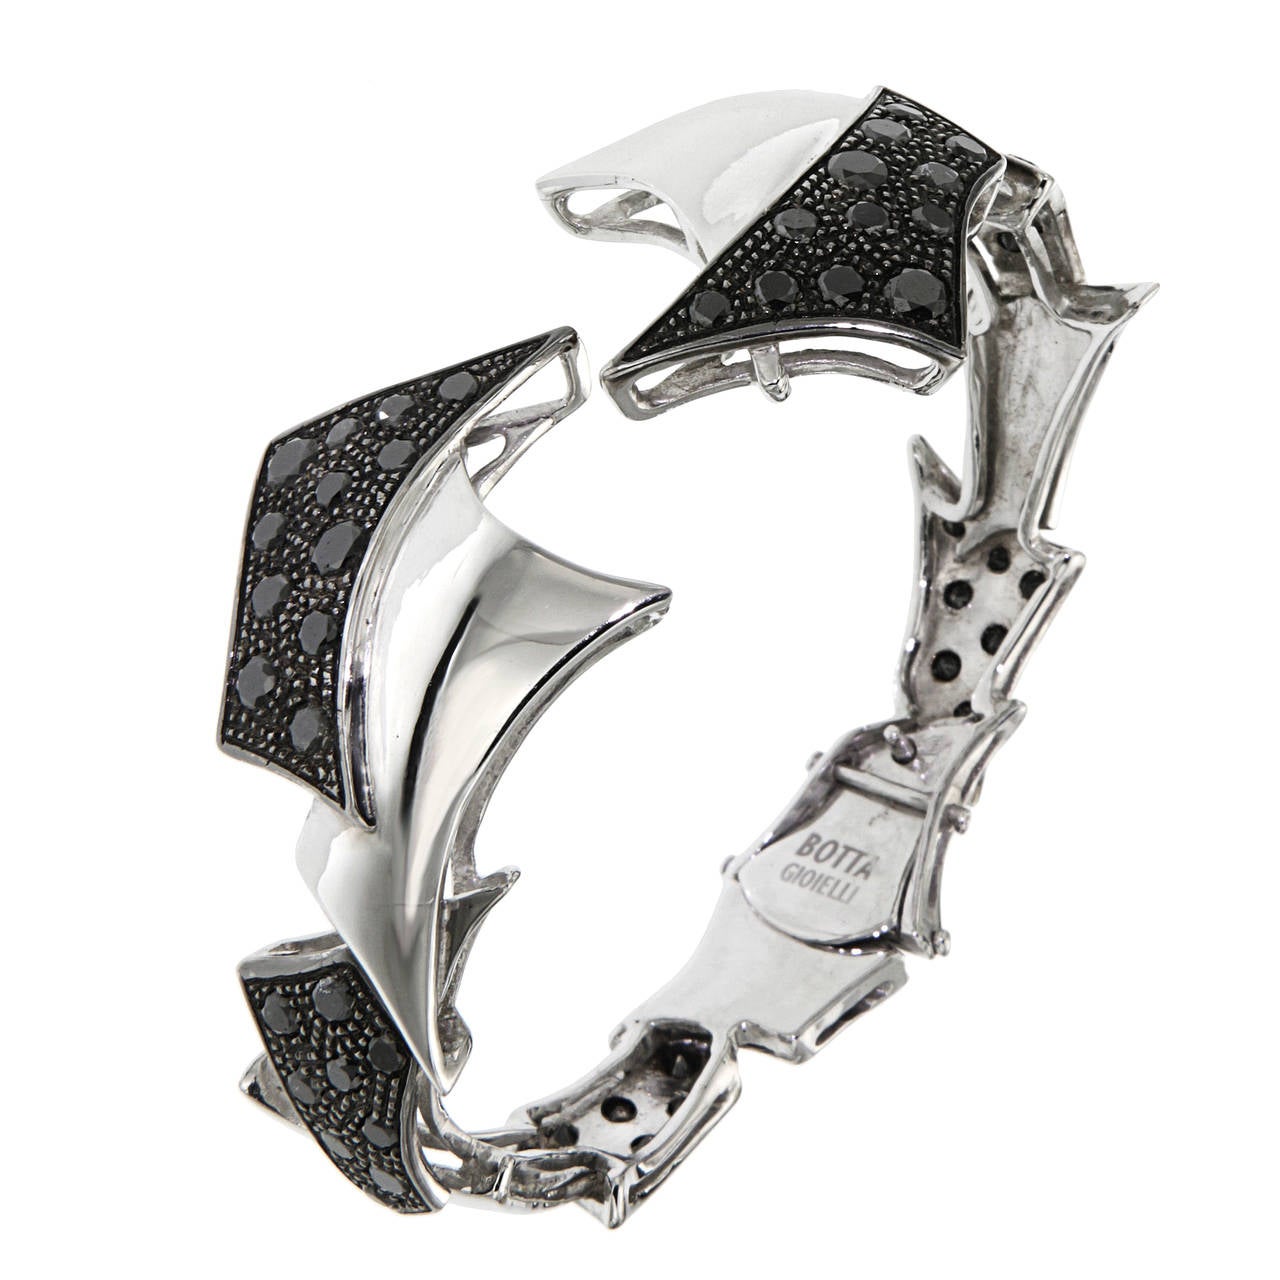 Black Diamonds White Gold Bracelet Handcrafted In Italy By Botta Gioielli For Sale